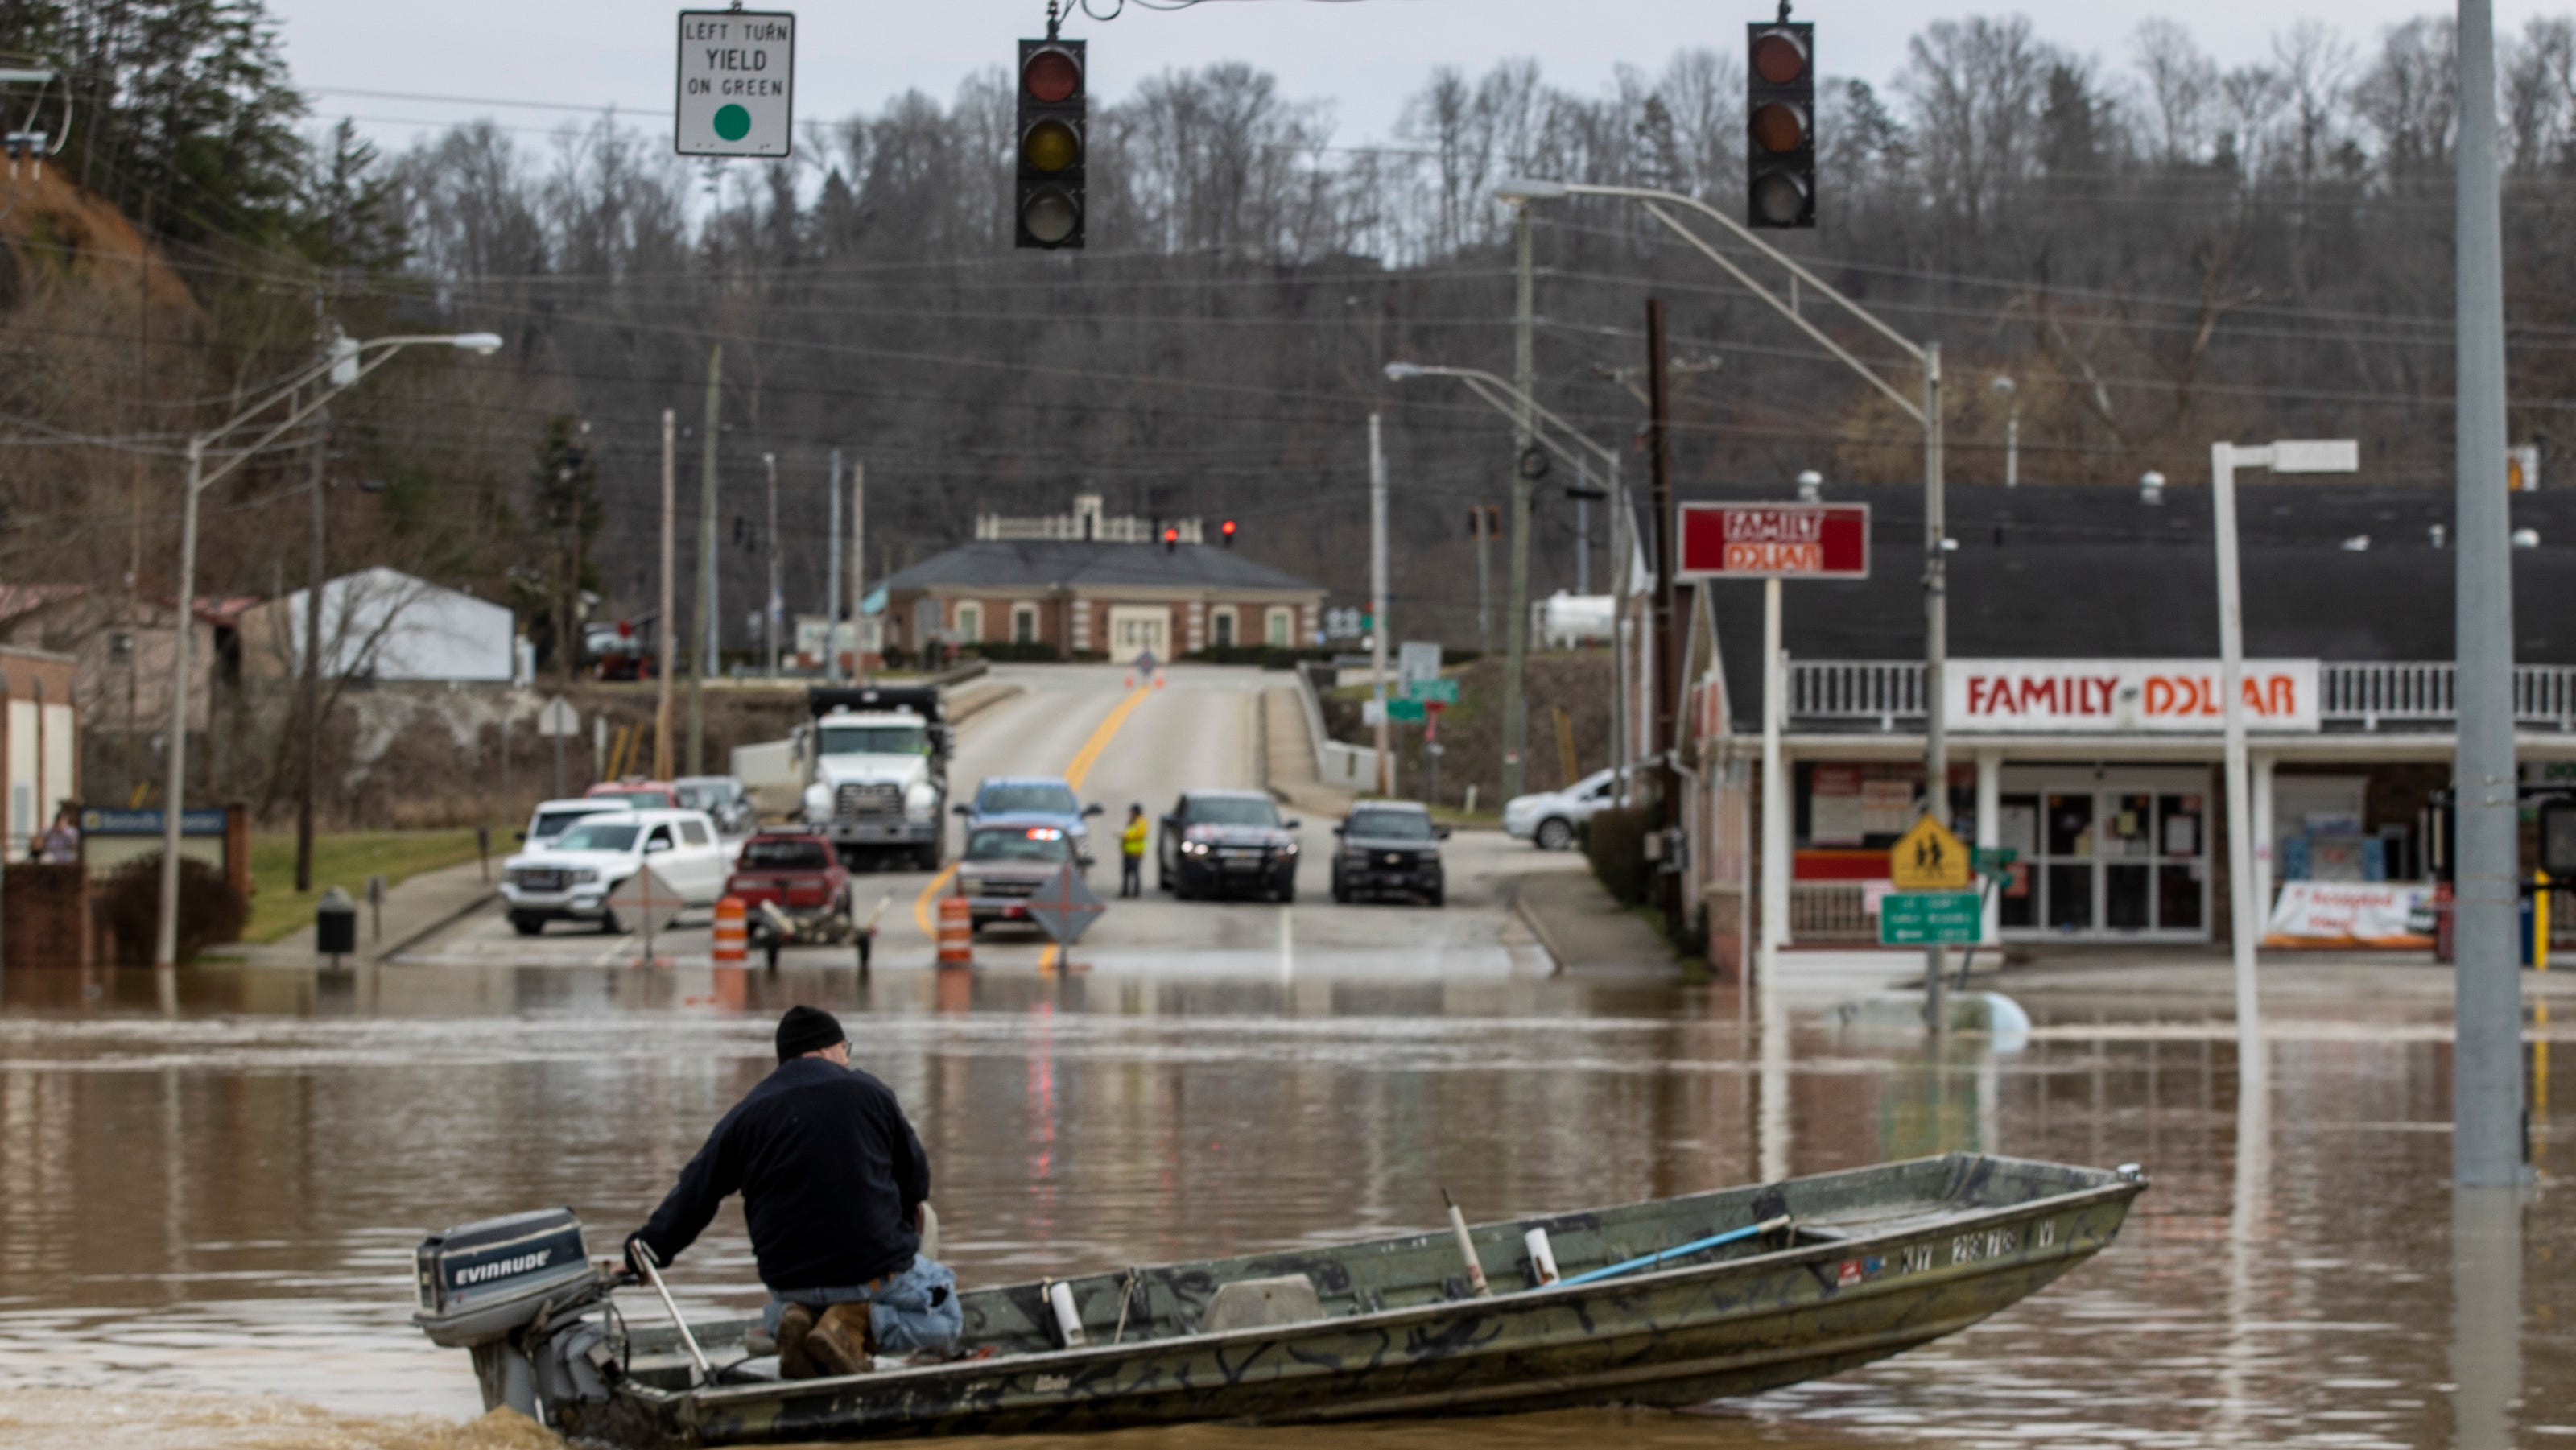 Kentucky flooding Emergency declared after recordsetting rain